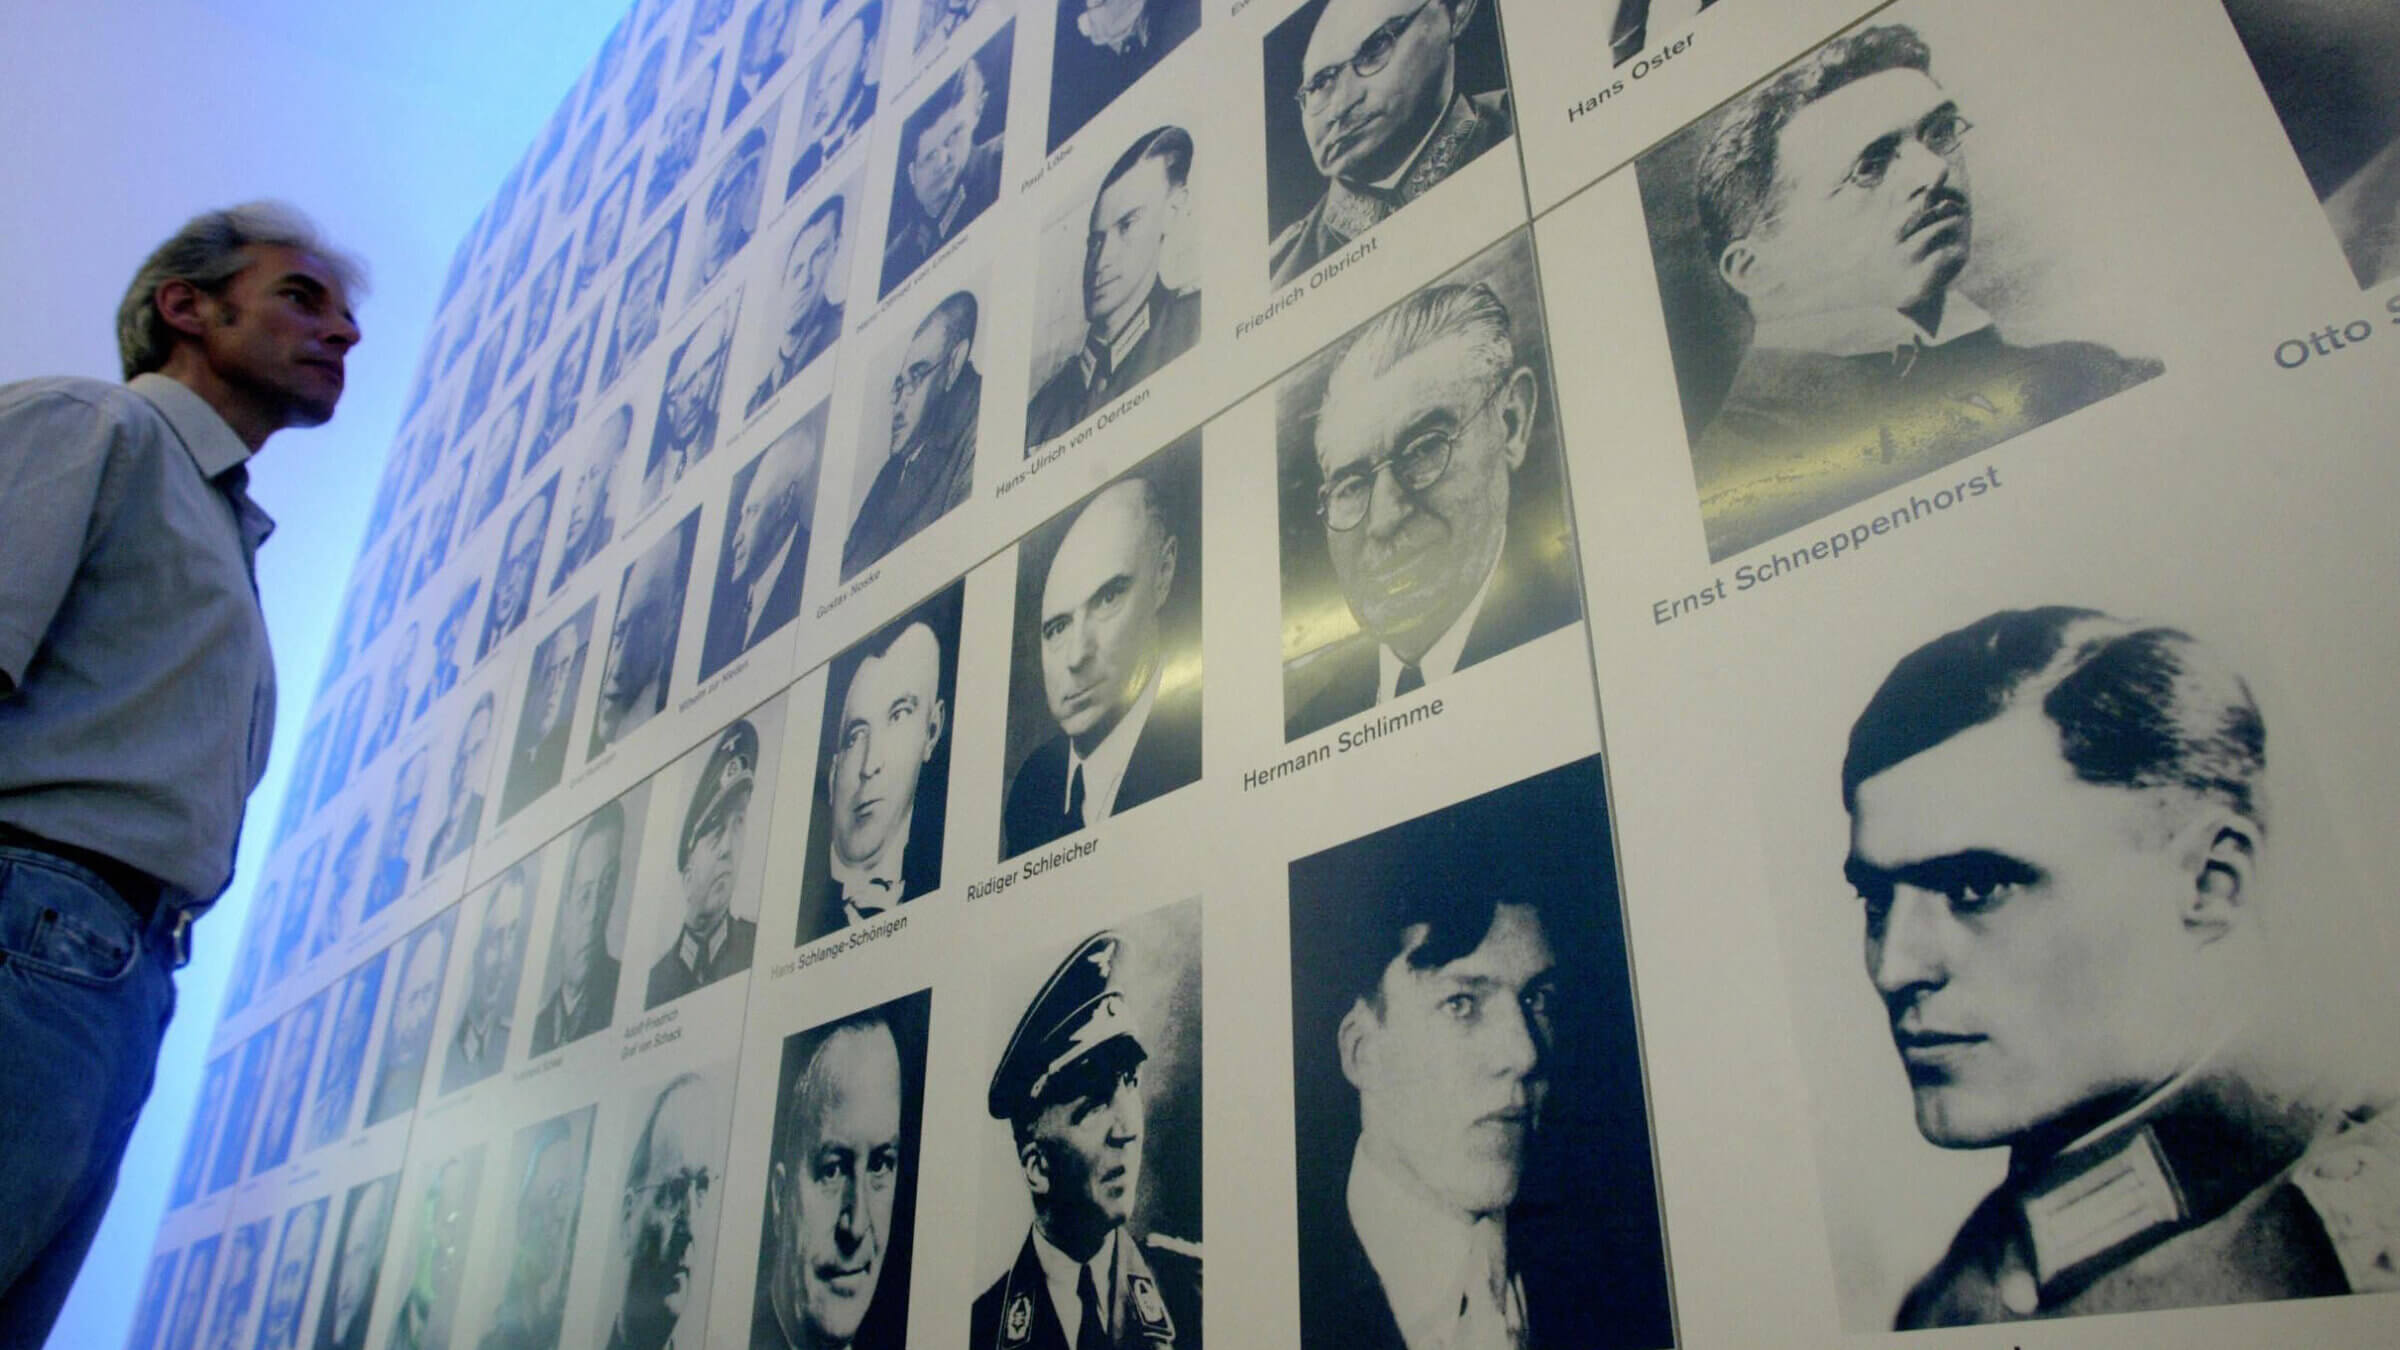 In Berlin, a wall of photos displays members of the resistance who plotted a 1944 assassination attempt against Hitler.